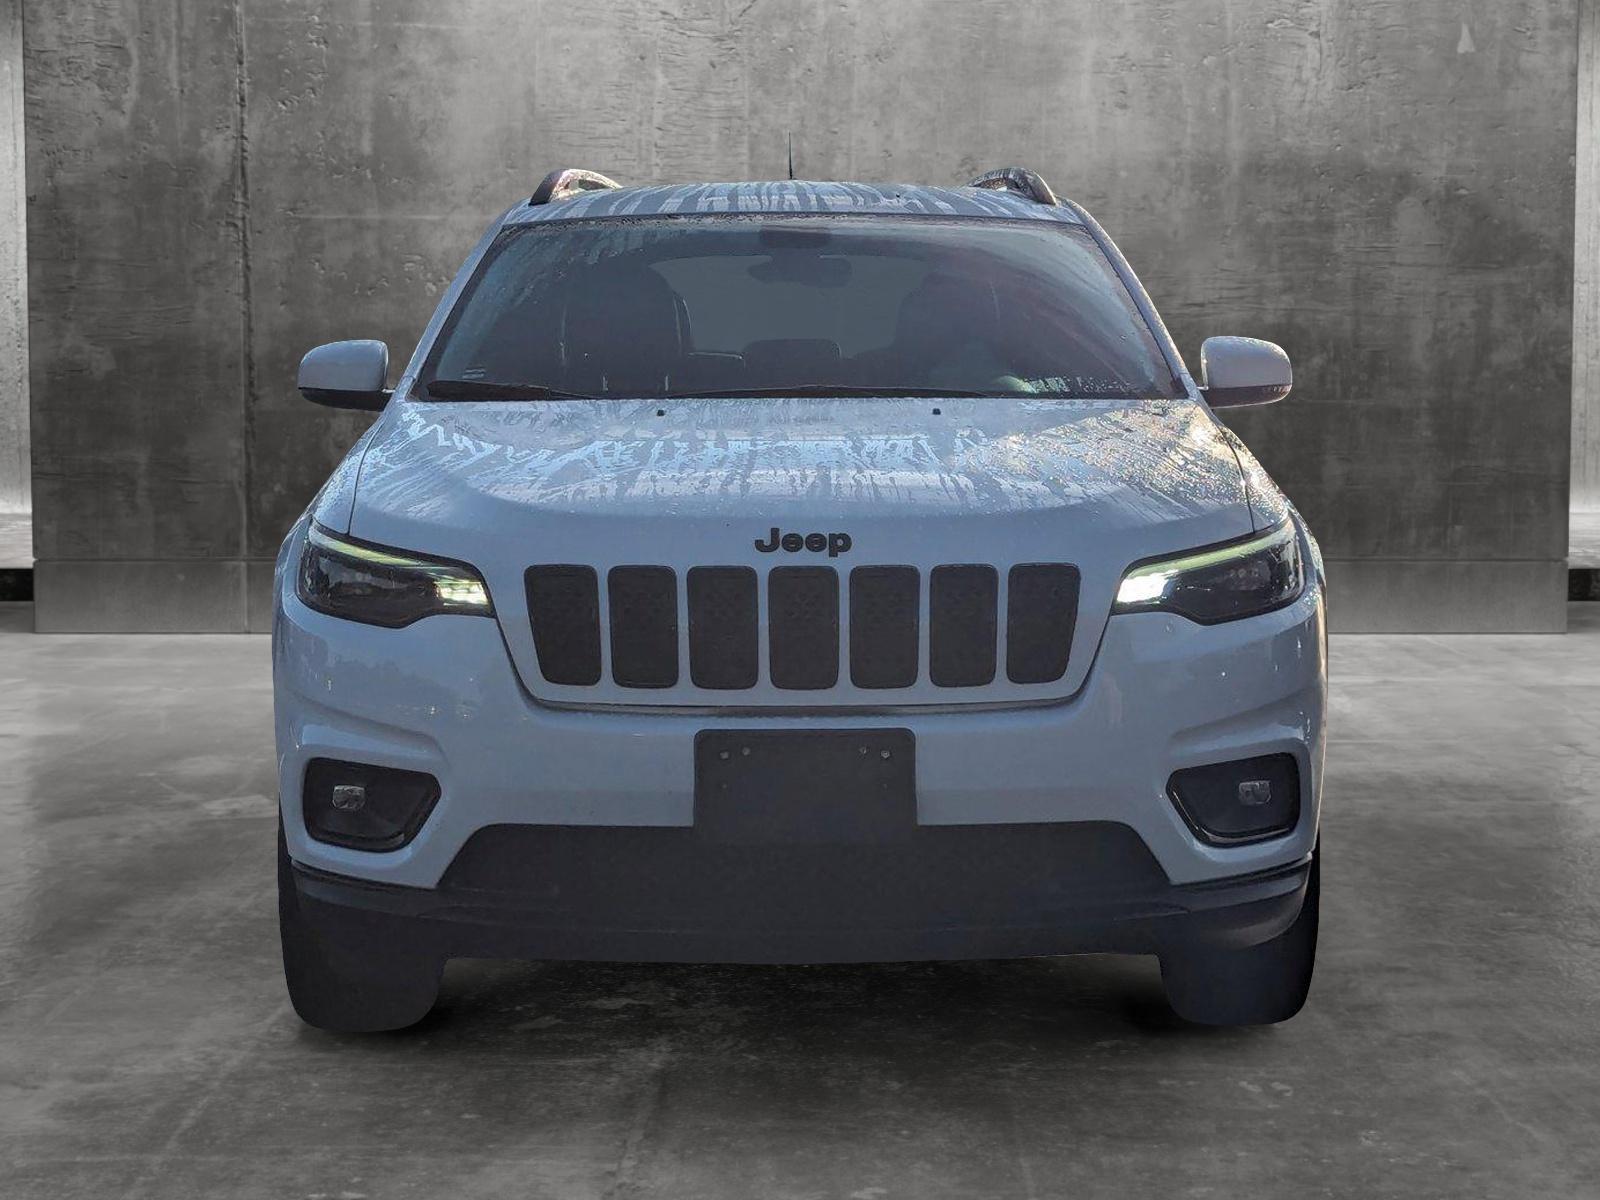 Used 2019 Jeep Cherokee Altitude with VIN 1C4PJMLB3KD455274 for sale in Orlando, FL